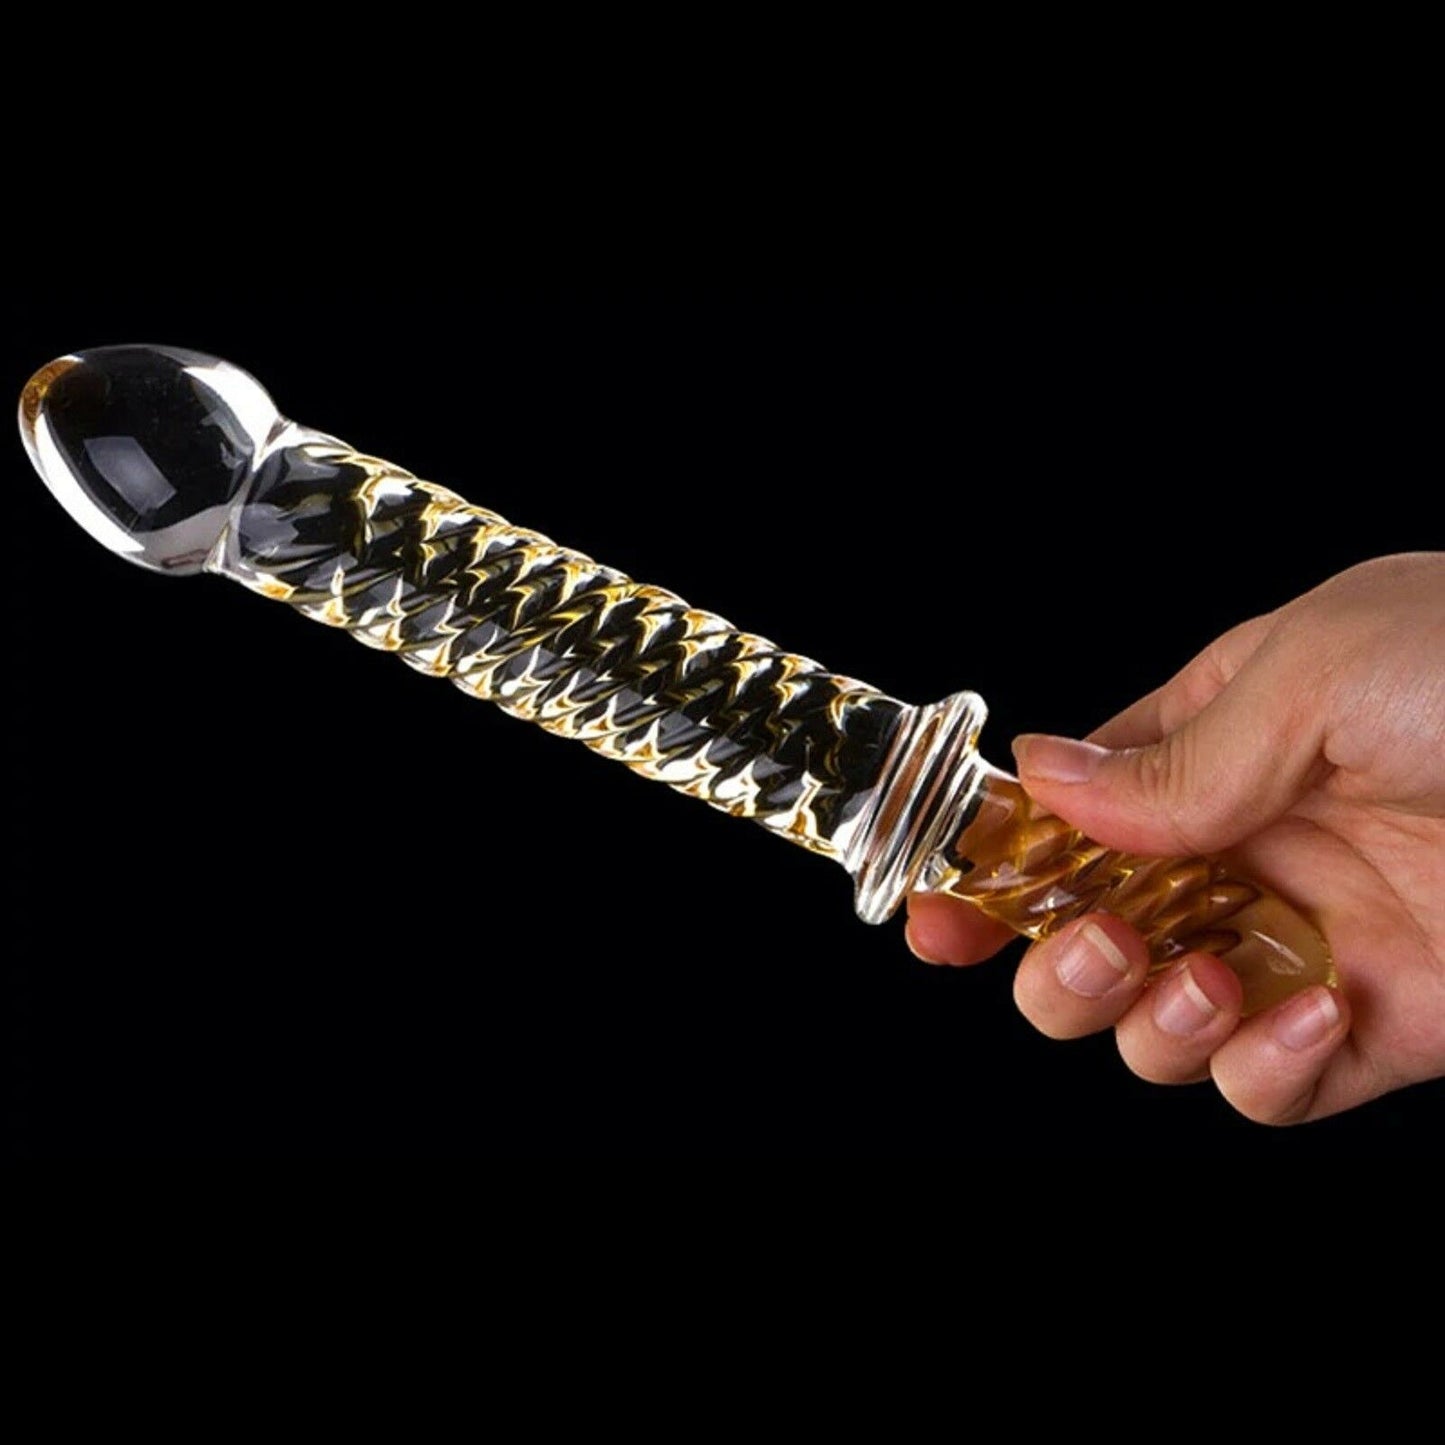 9" Glass Dildo Dong Wand Massager Thruster Anal Vaginal LARGE Adult Gay Sex Toy